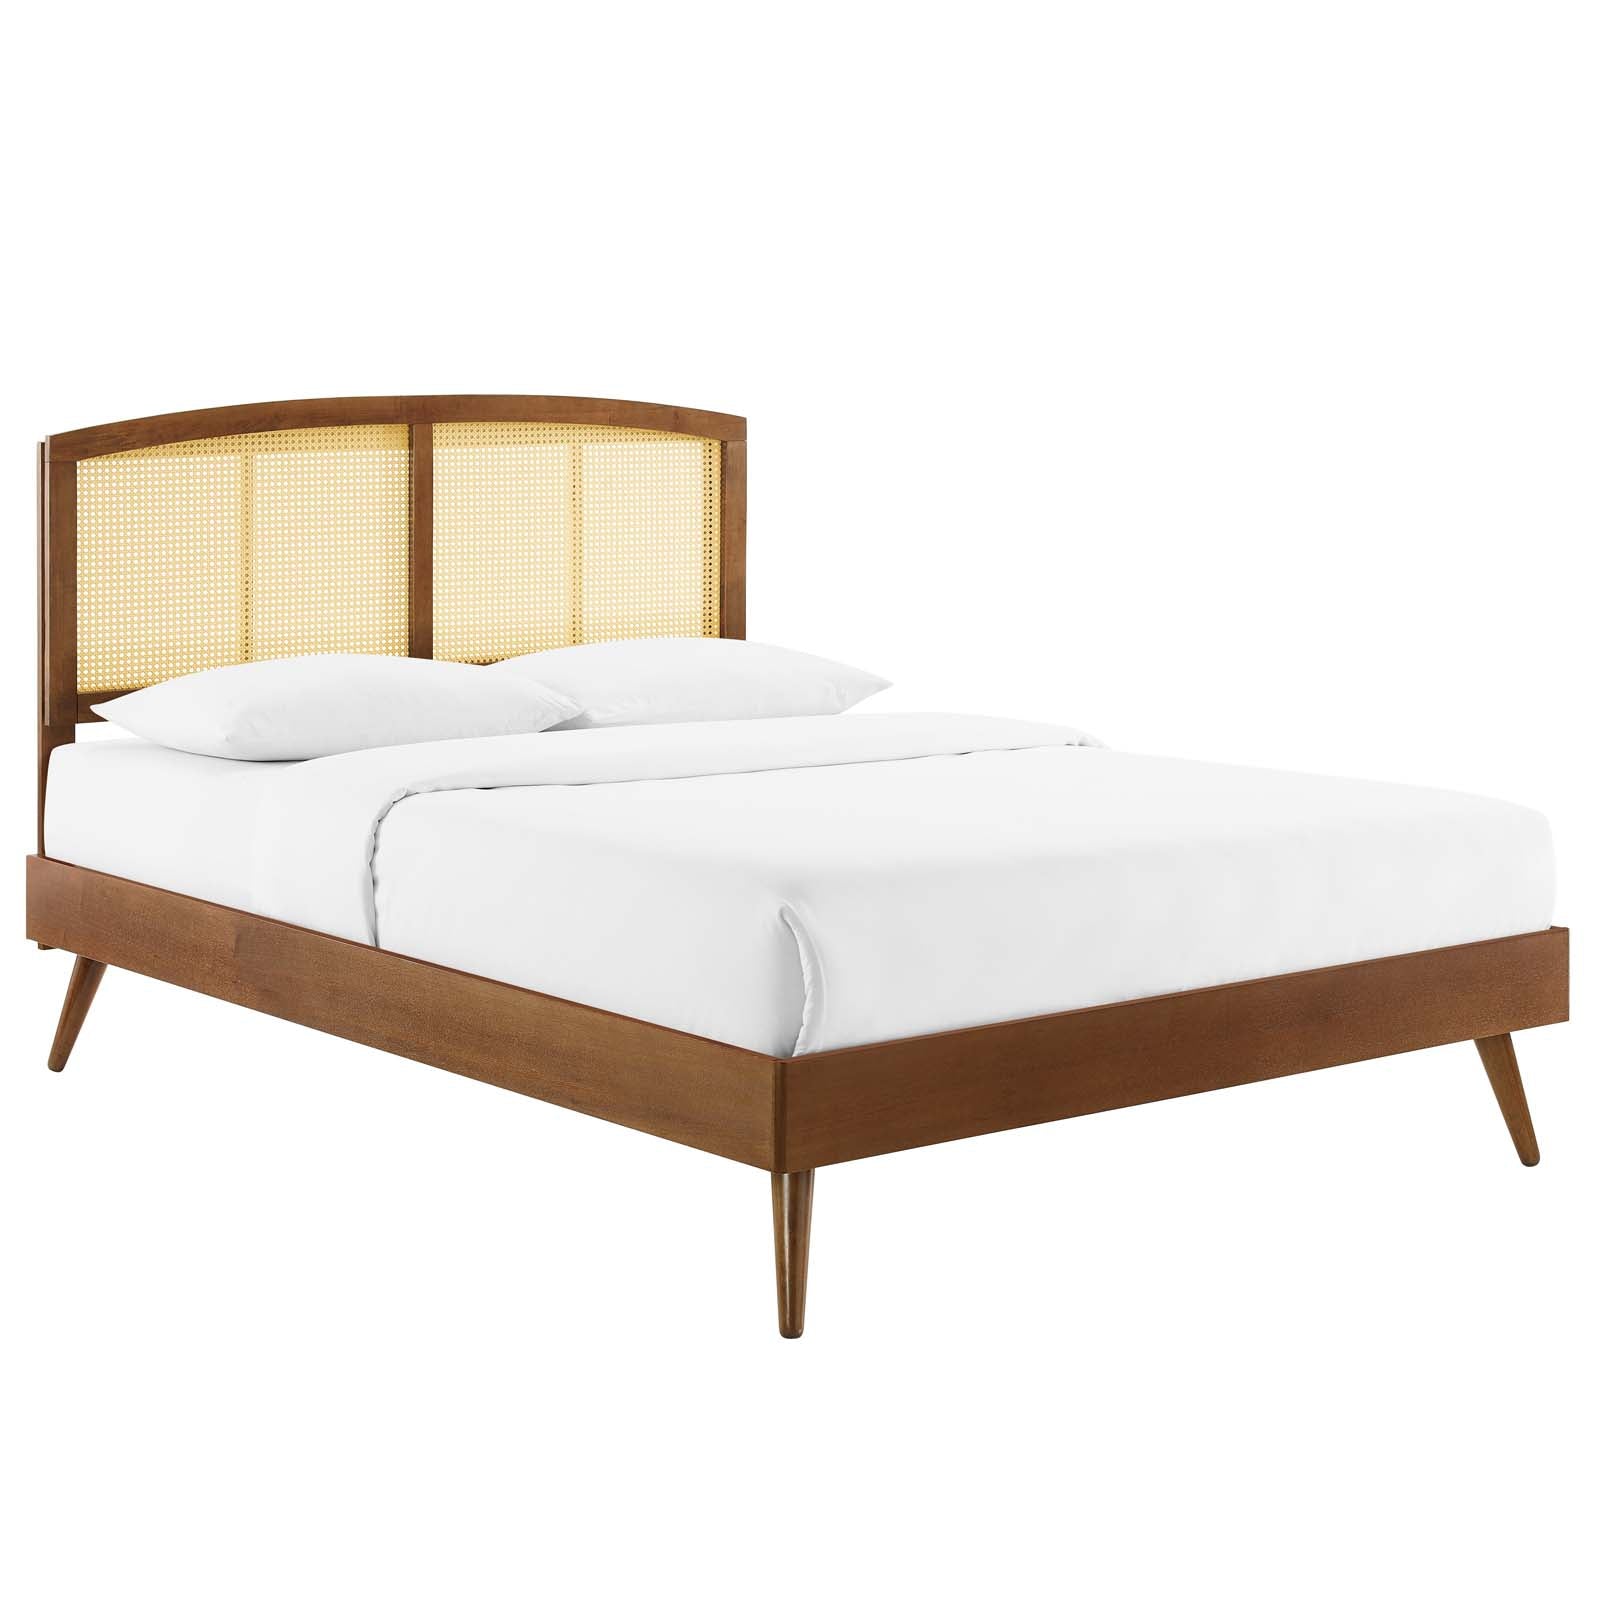 Modway Beds - Sierra-Cane-and-Wood-Full-Platform-Bed-With-Splayed-Legs-Walnut